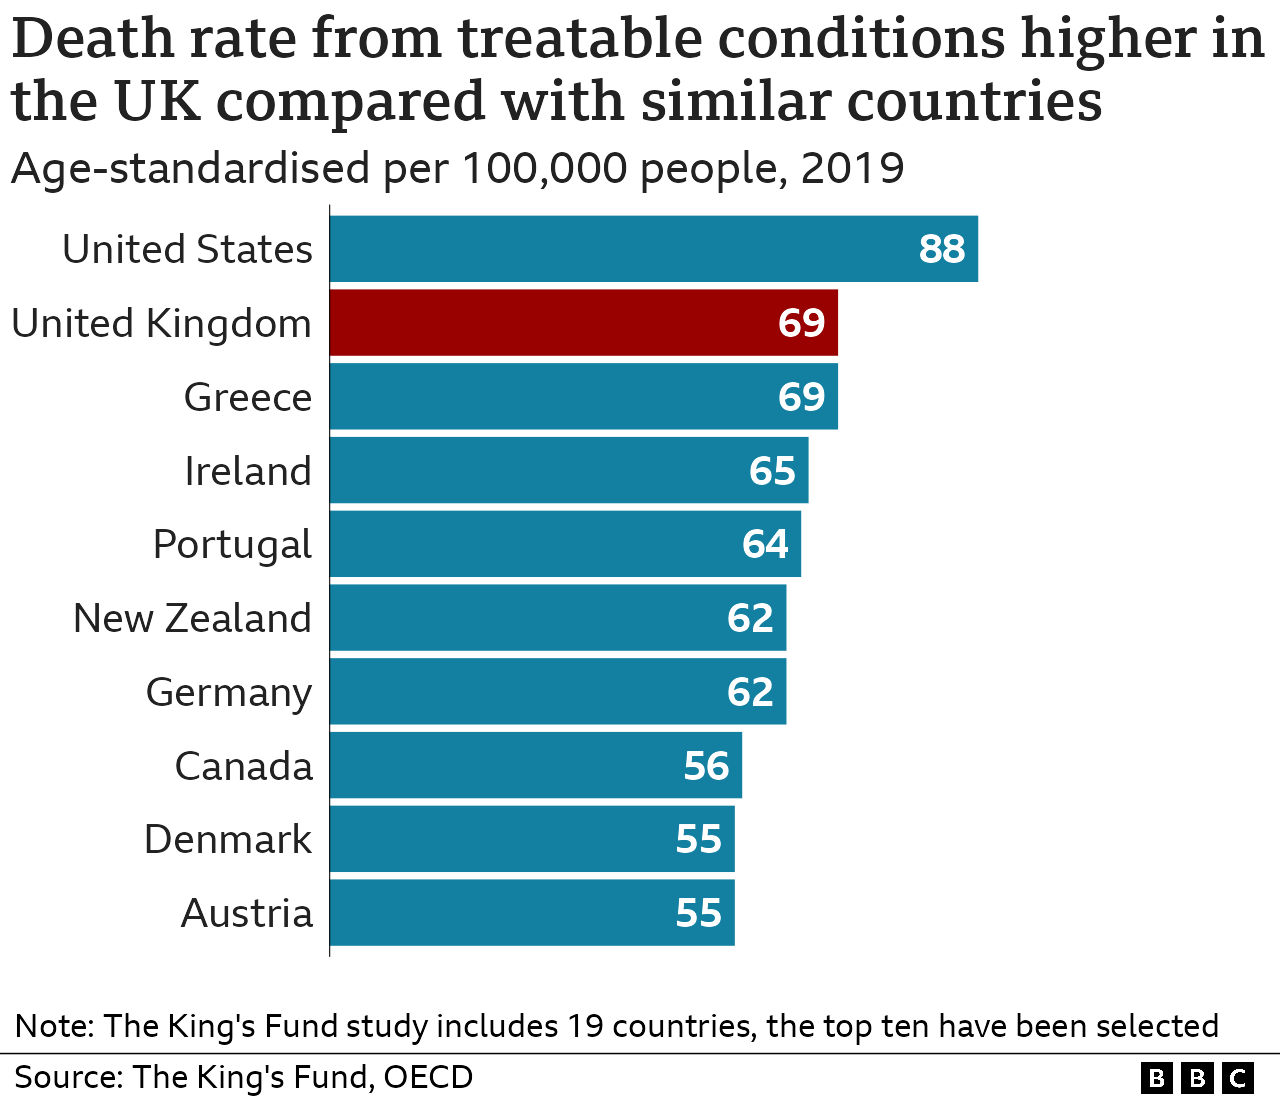 Bar chart showing that the death rate from treatable conditions is higher in the UK compared with similar countries. United States 88 per 100,000 people, United Kingdom and Greece 69, Ireland 65, Portugal 64, New Zealand and Germany 62, Canada 56, Denmark and Austria 55